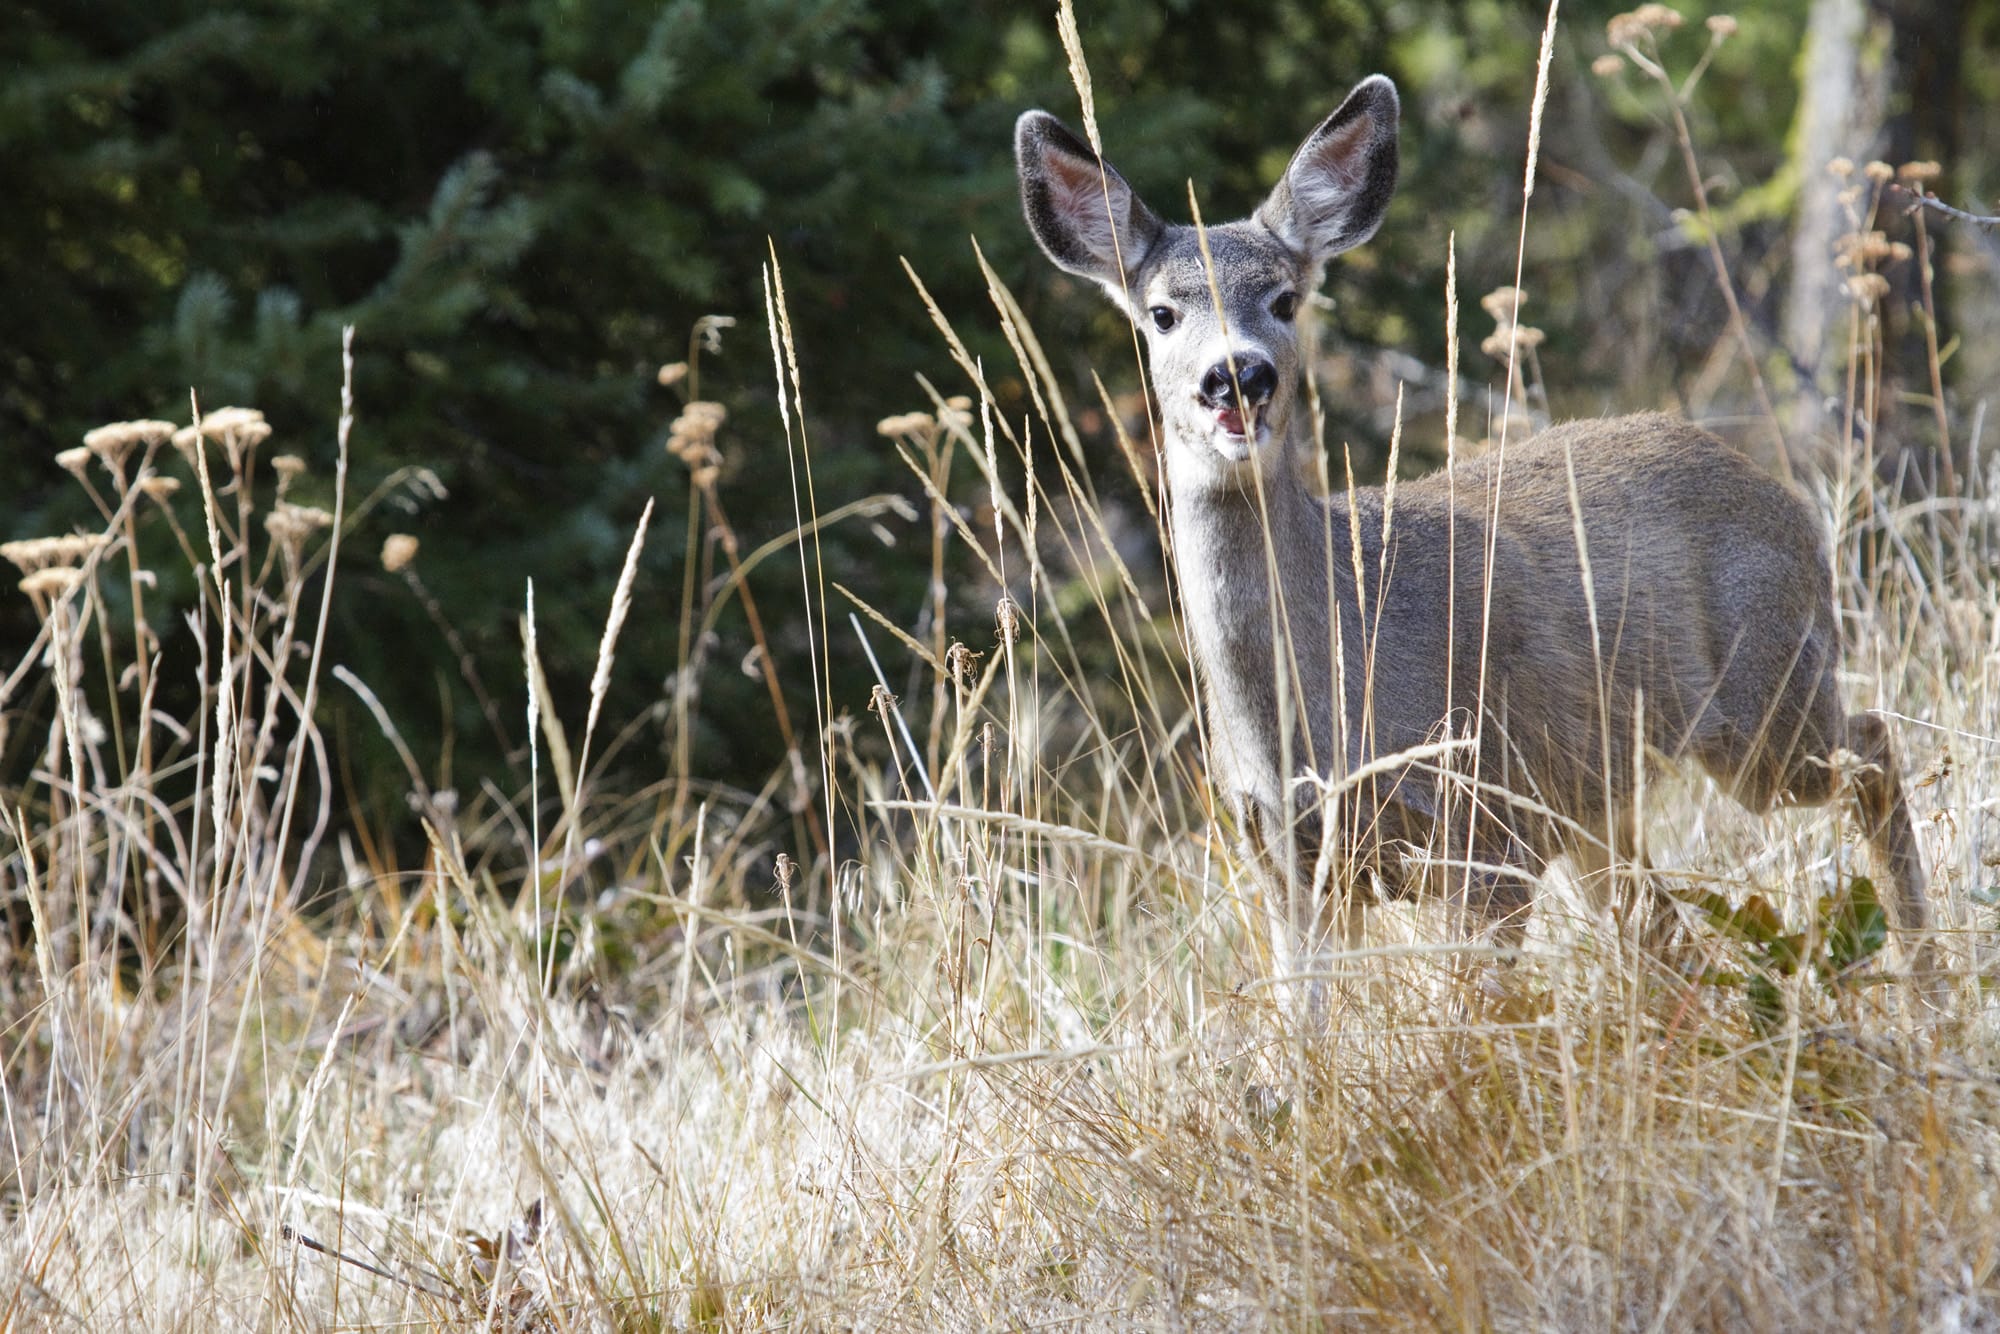 This deer was photographed near Cleman Mountain in the Yakima area.